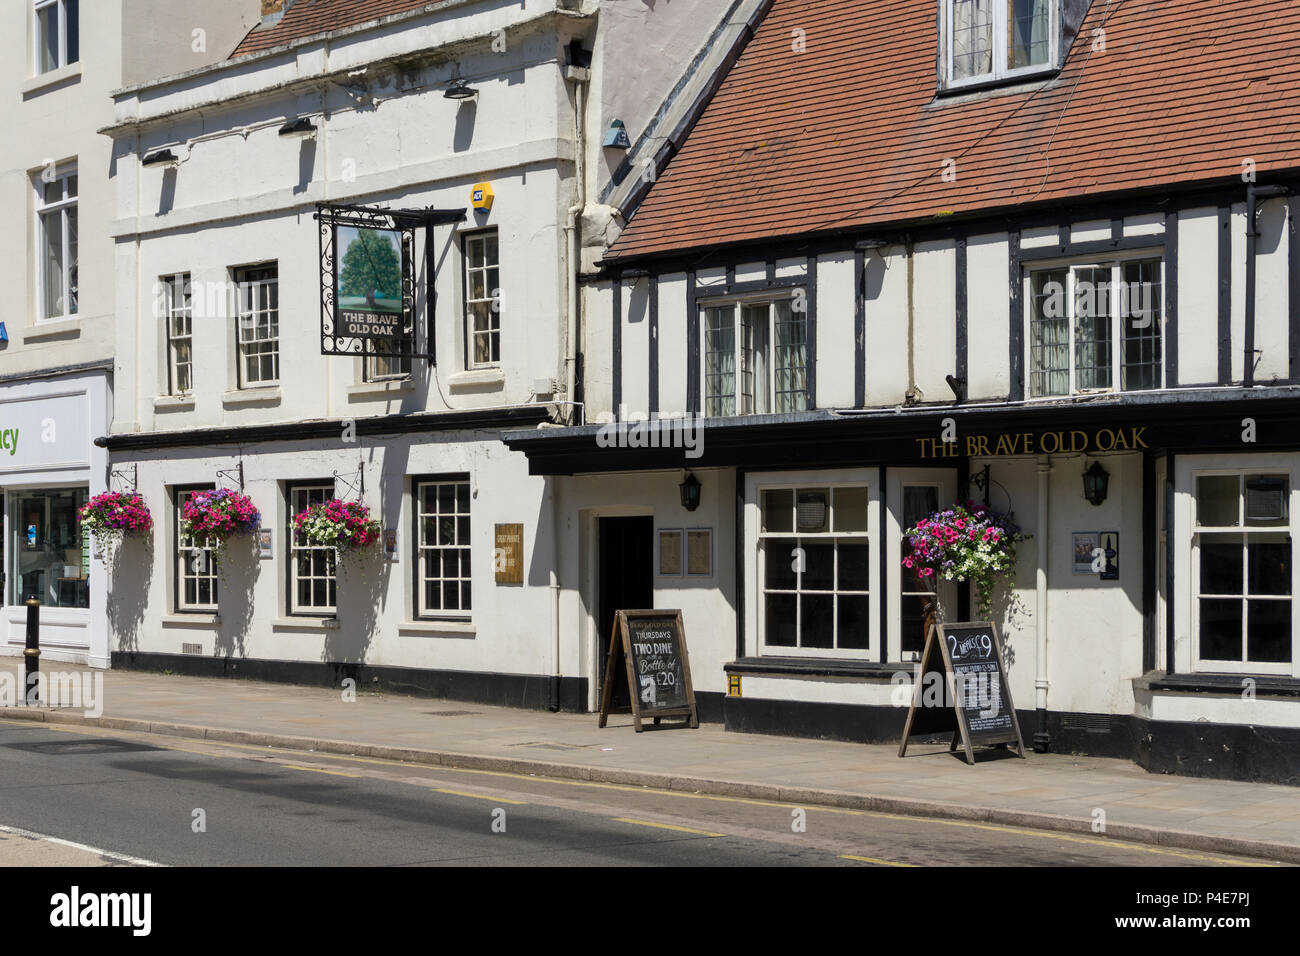 The Brave Old Oak, a traditional pub in the centre of the market town of Towcester, Northamptonshire, UK; parts of the pub date back 300 years. Stock Photo